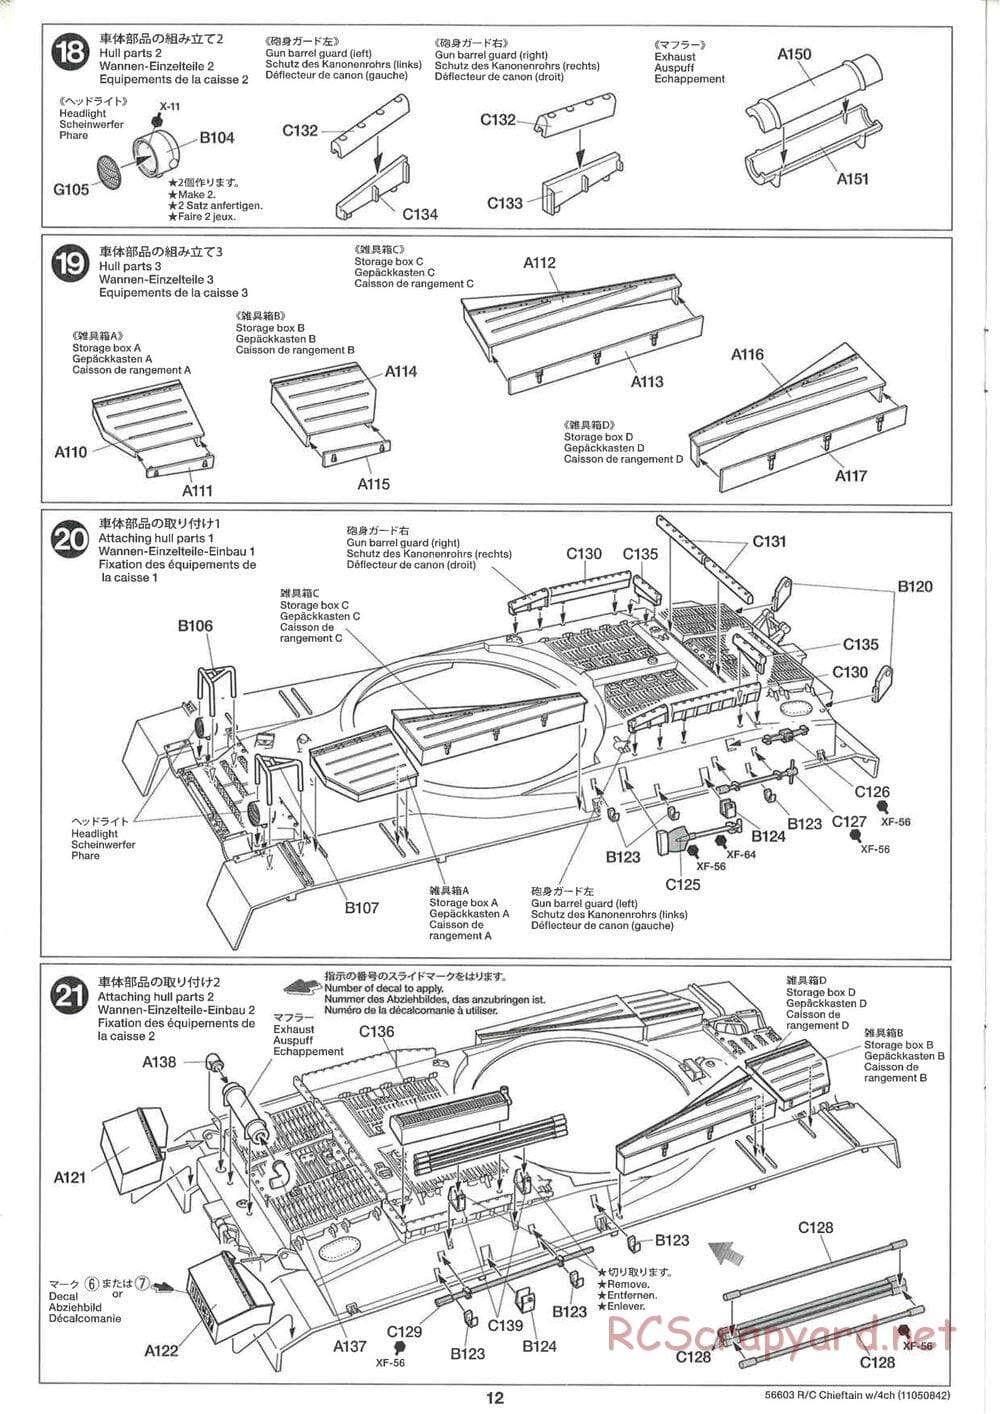 Tamiya - British Army Battle Tank Cheiftain - 1/25 Scale Chassis - Manual - Page 12